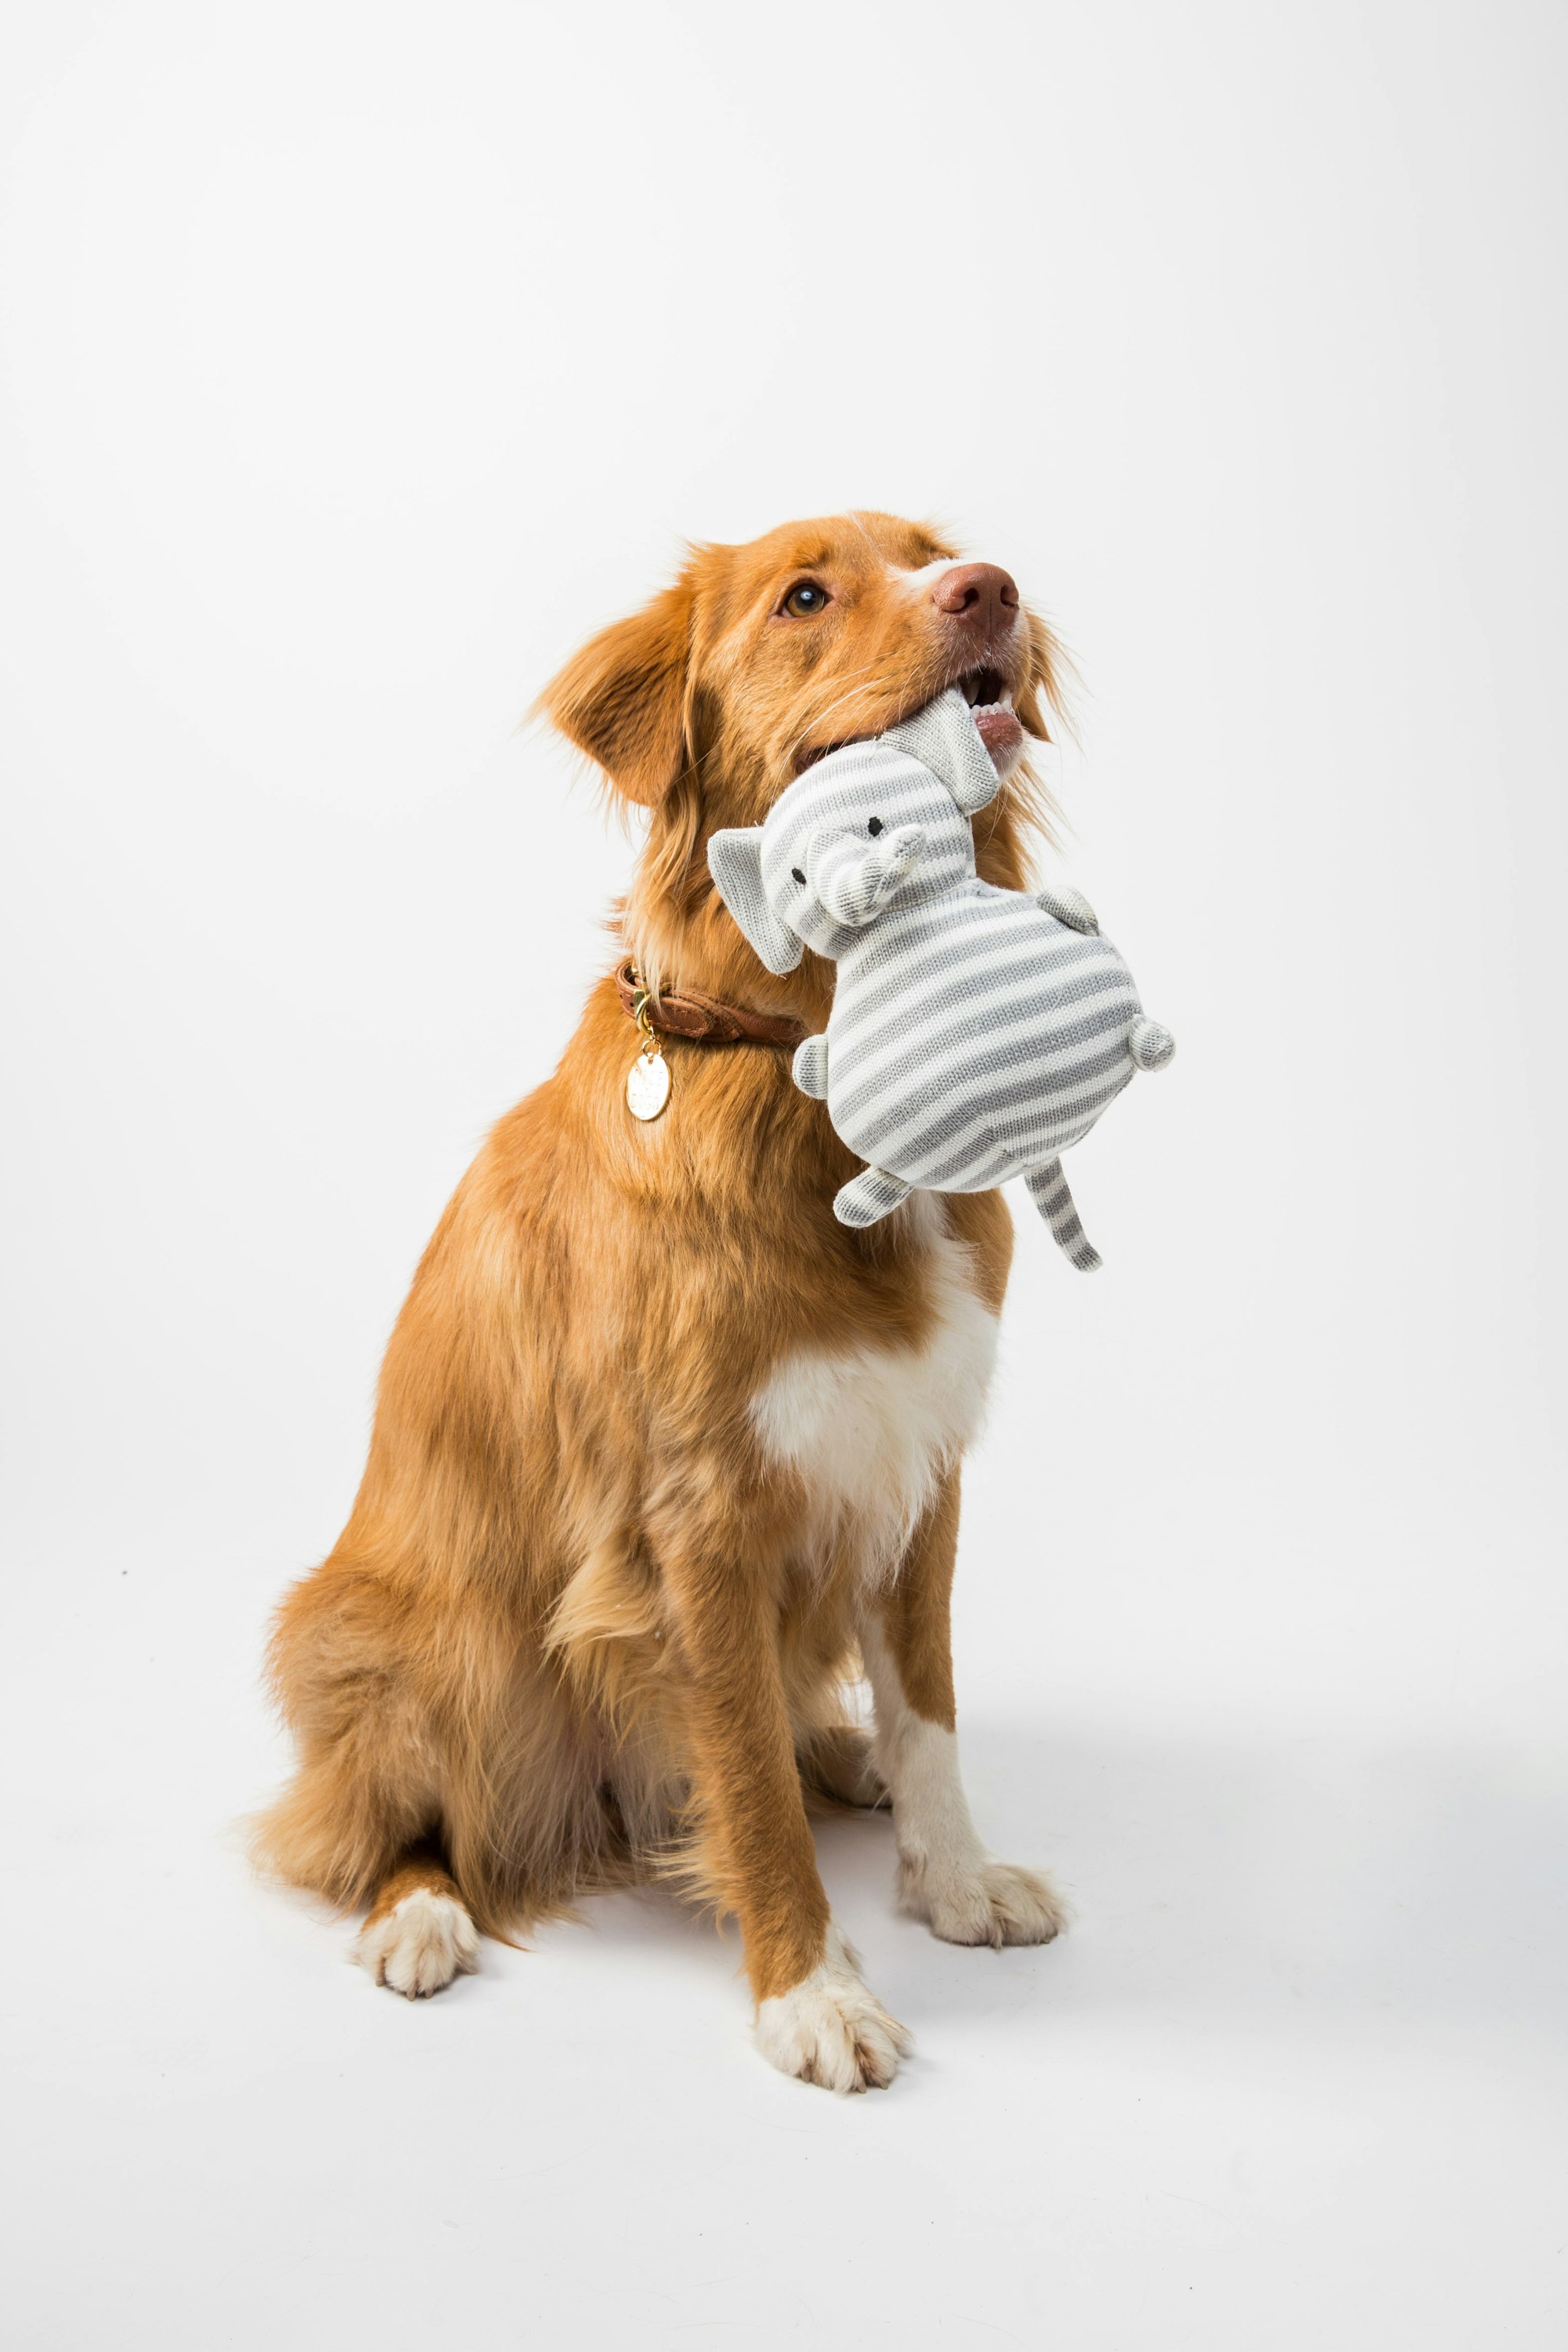 cute dog holding a toy on white background